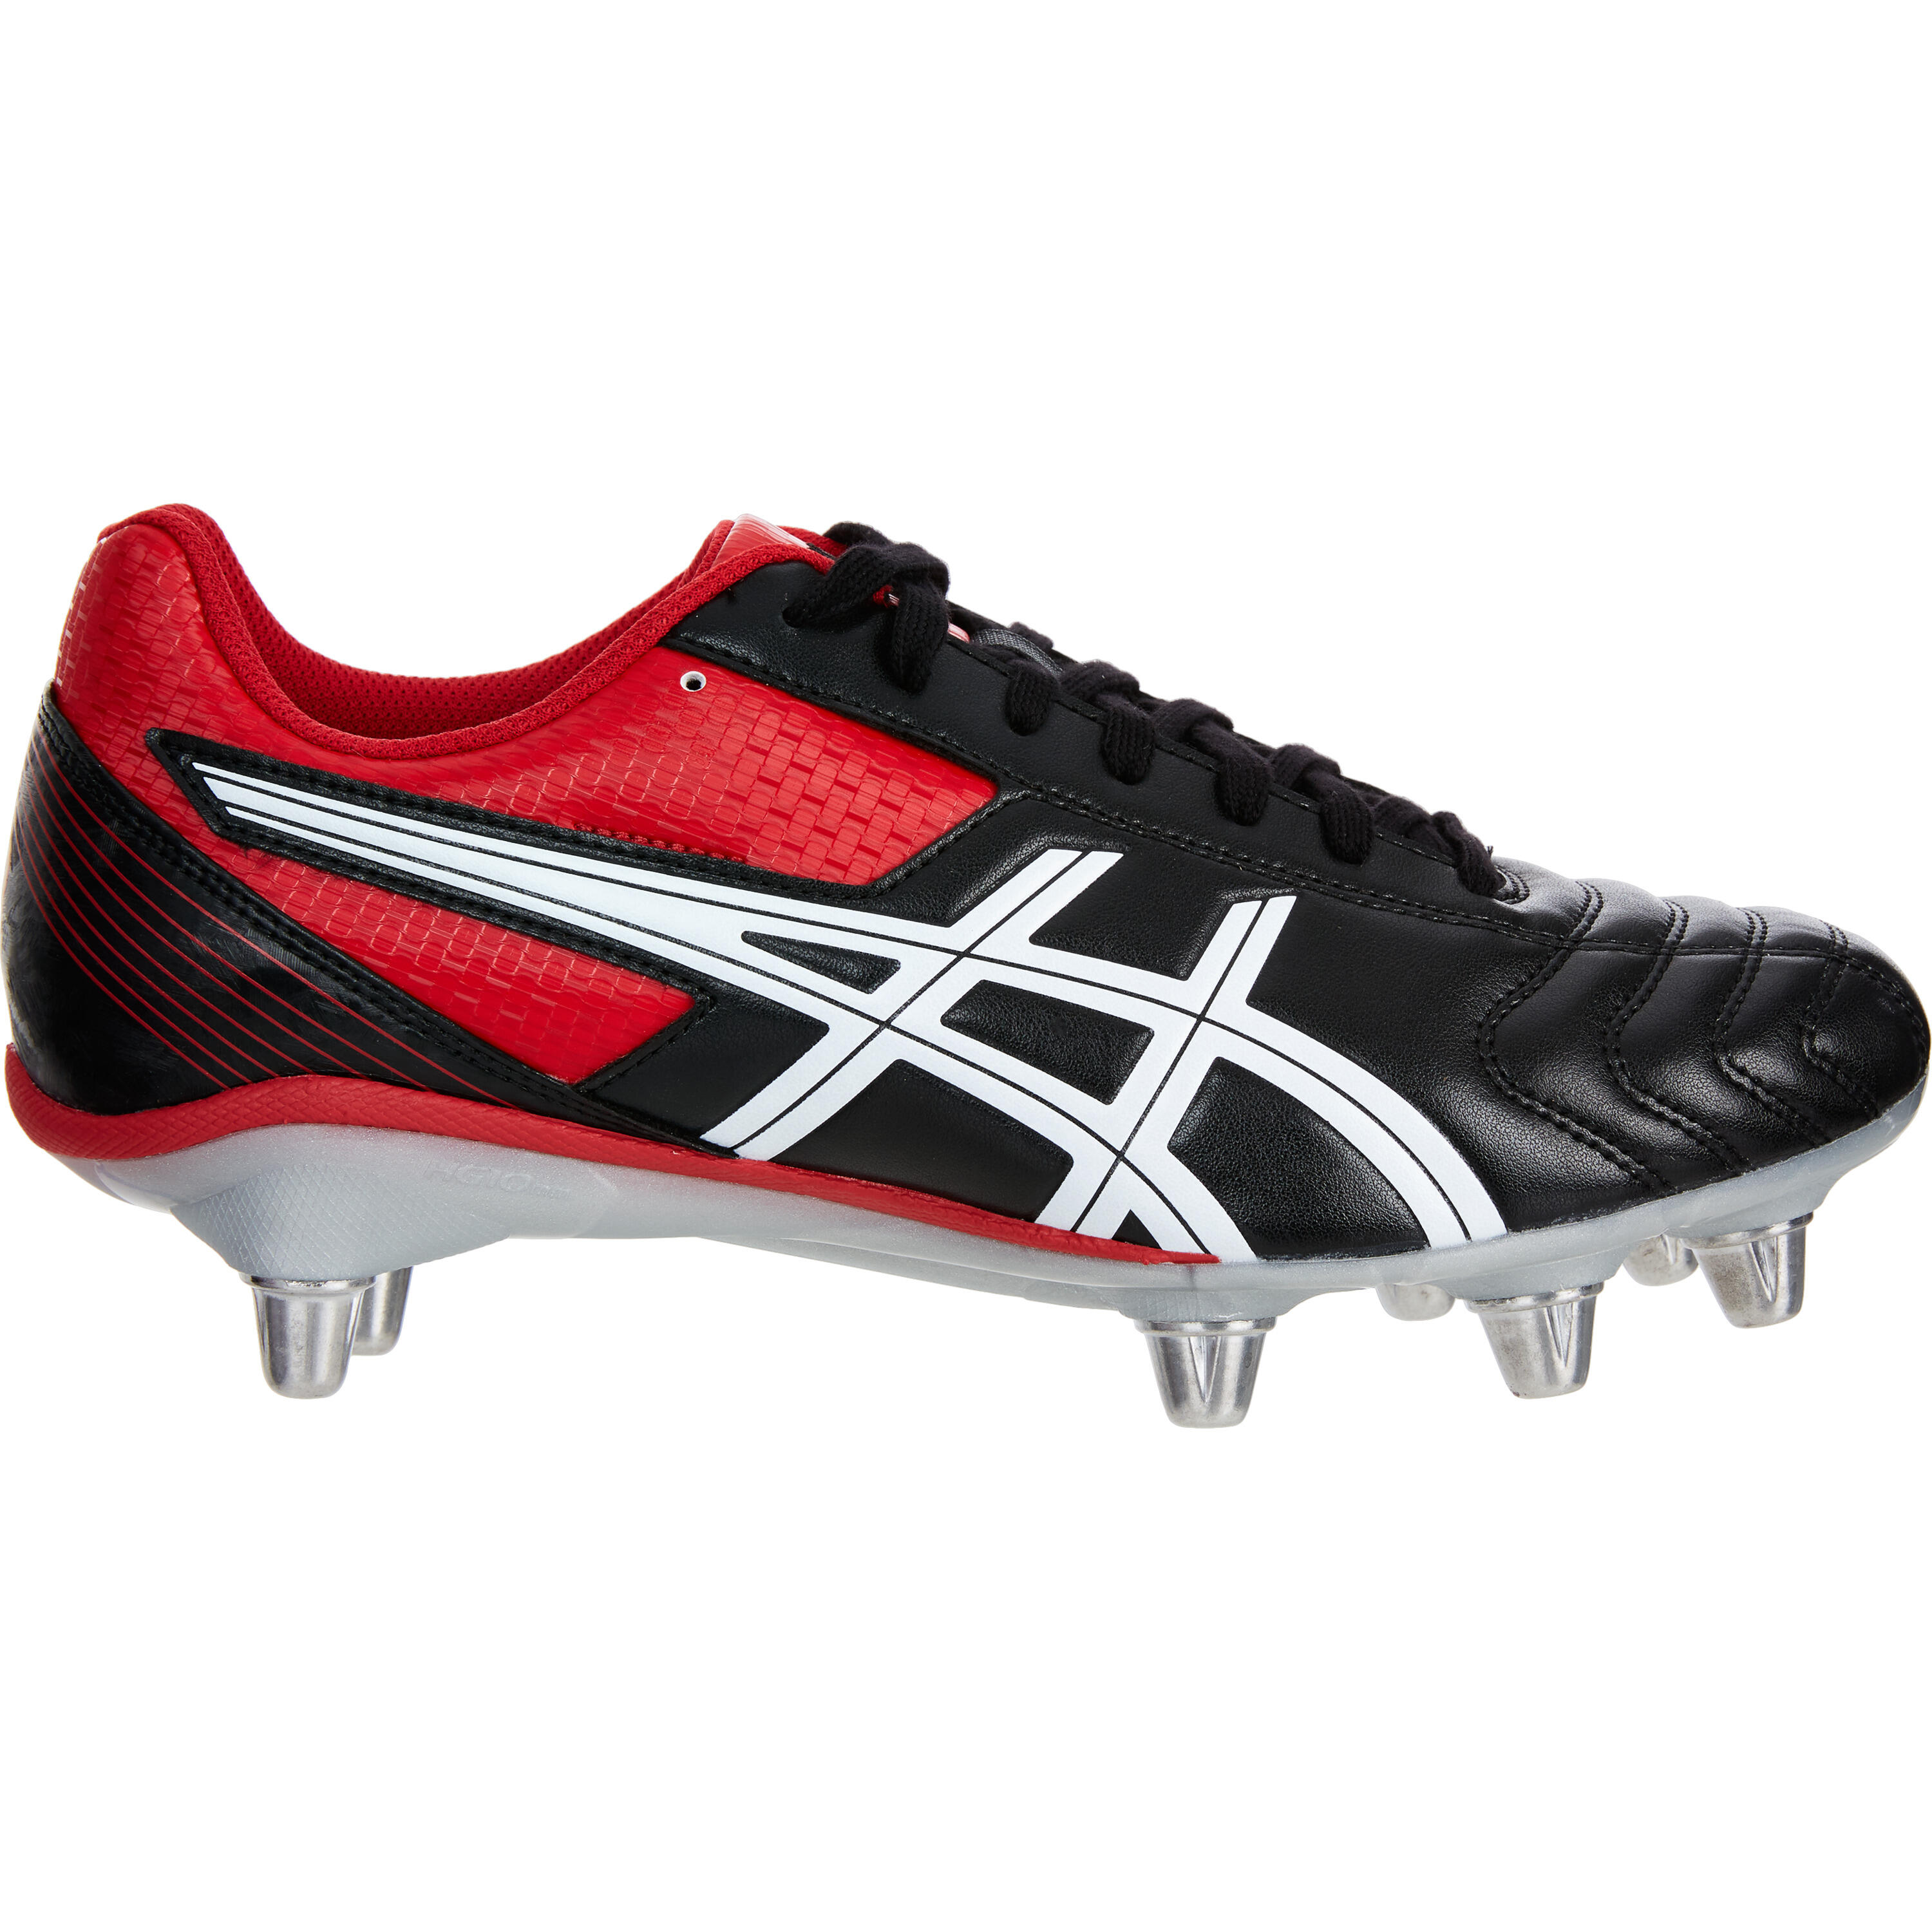 ASICS Asics Lethal Tackle Soft Ground Rugby Boots Adults  7 UK black/racing red/white